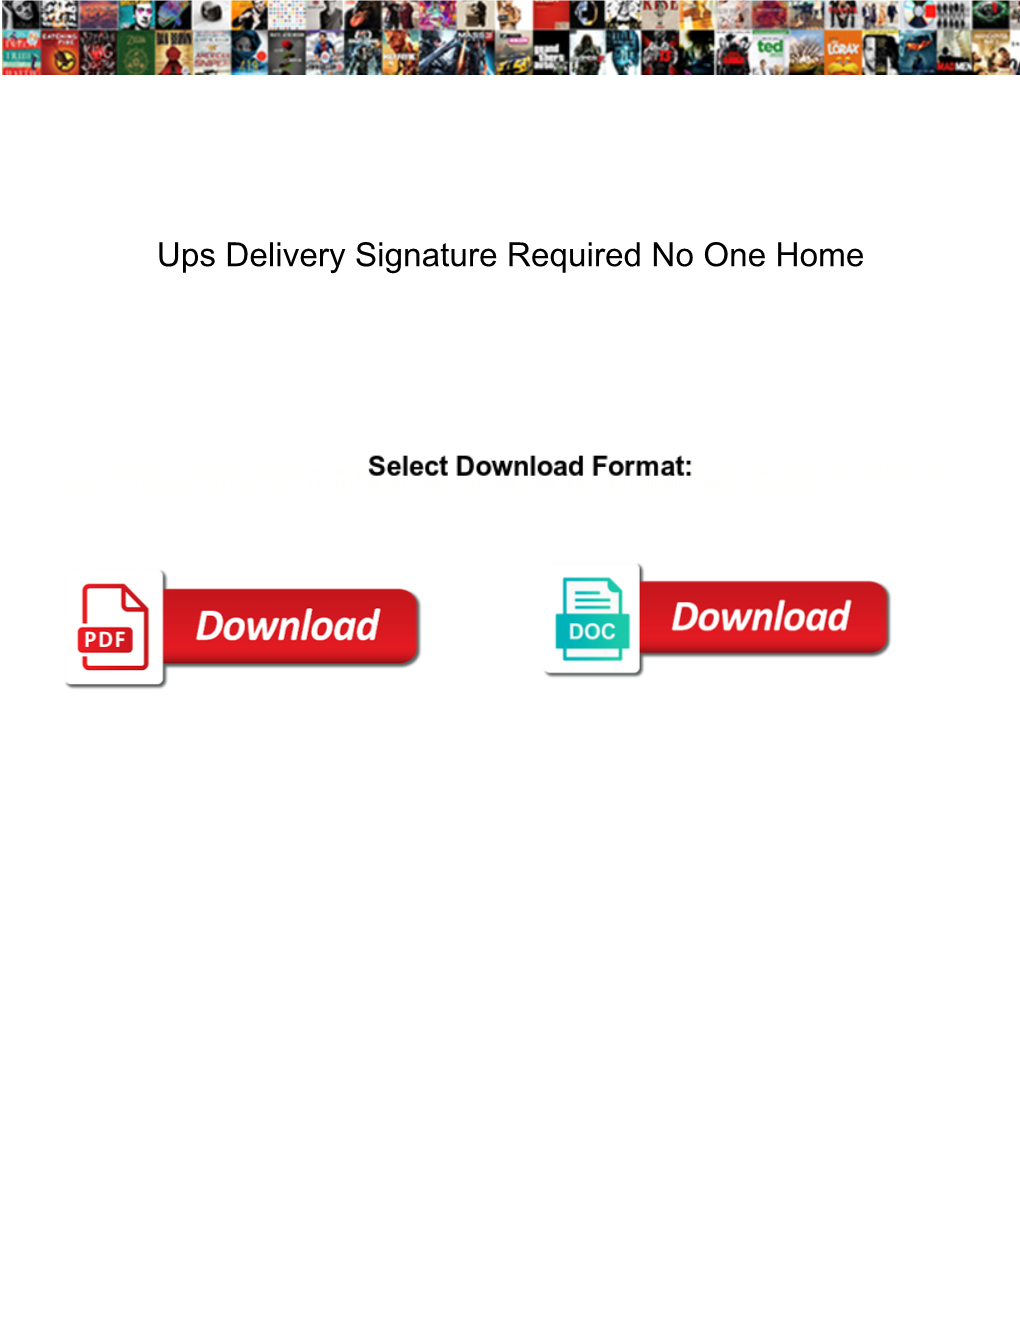 Ups Delivery Signature Required No One Home